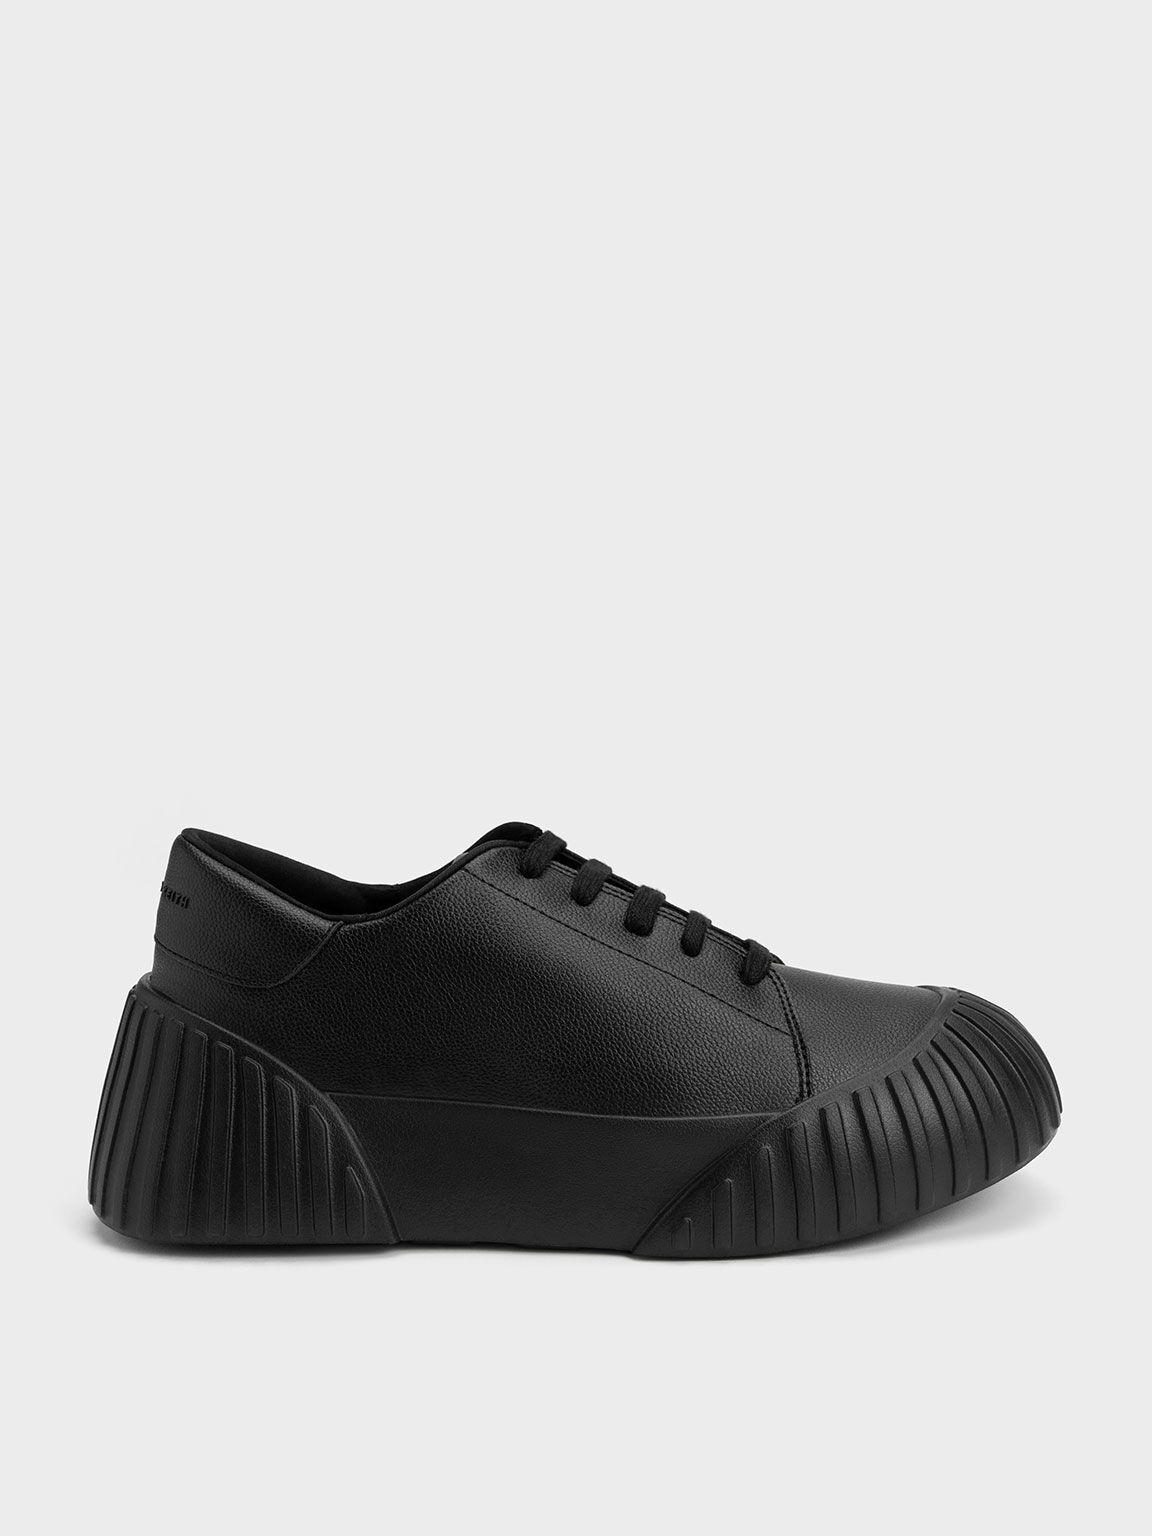 Adrian Chunky Sole Sneakers, Black, hi-res